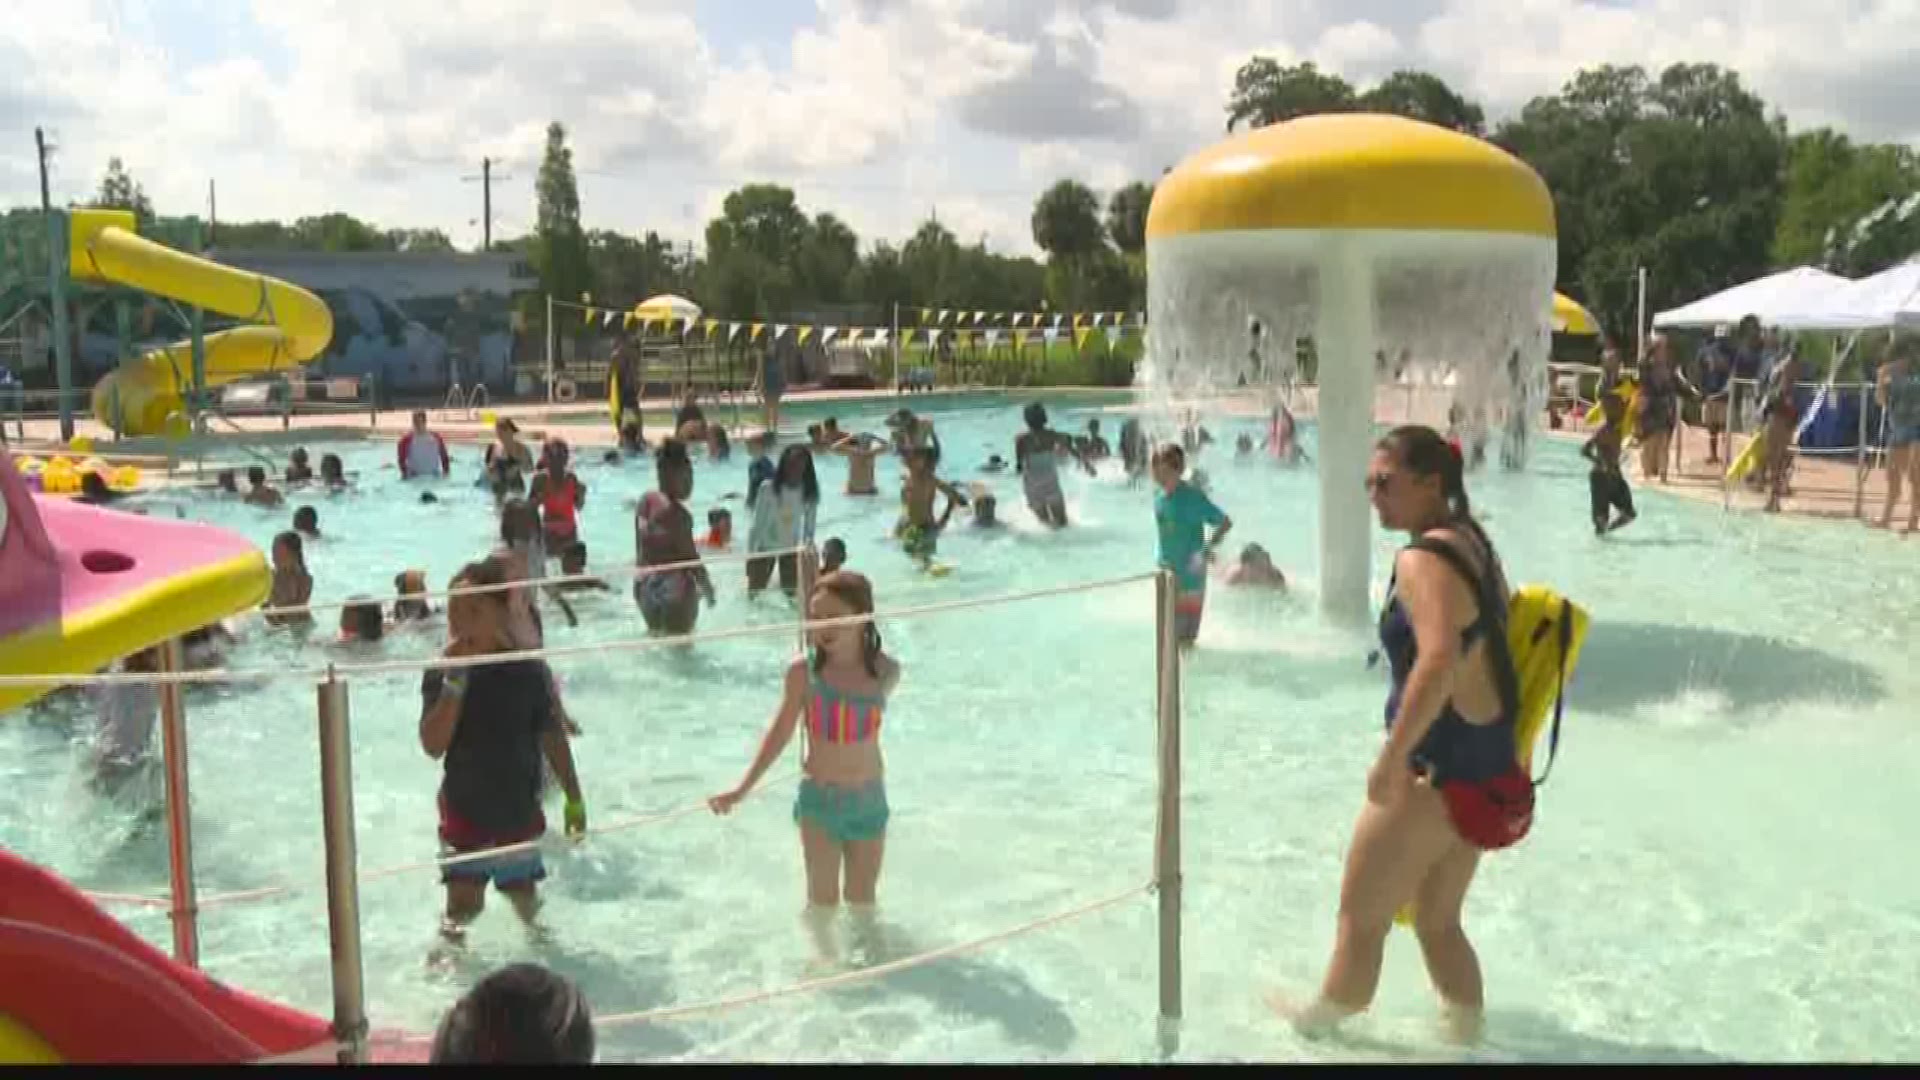 The Tampa Park and Recreation Department hosted free swim lessons Thursday as part of the "World's Largest Swim Lesson."

Hundreds of Tampa Bay area children got free swimming lessons from instructors.